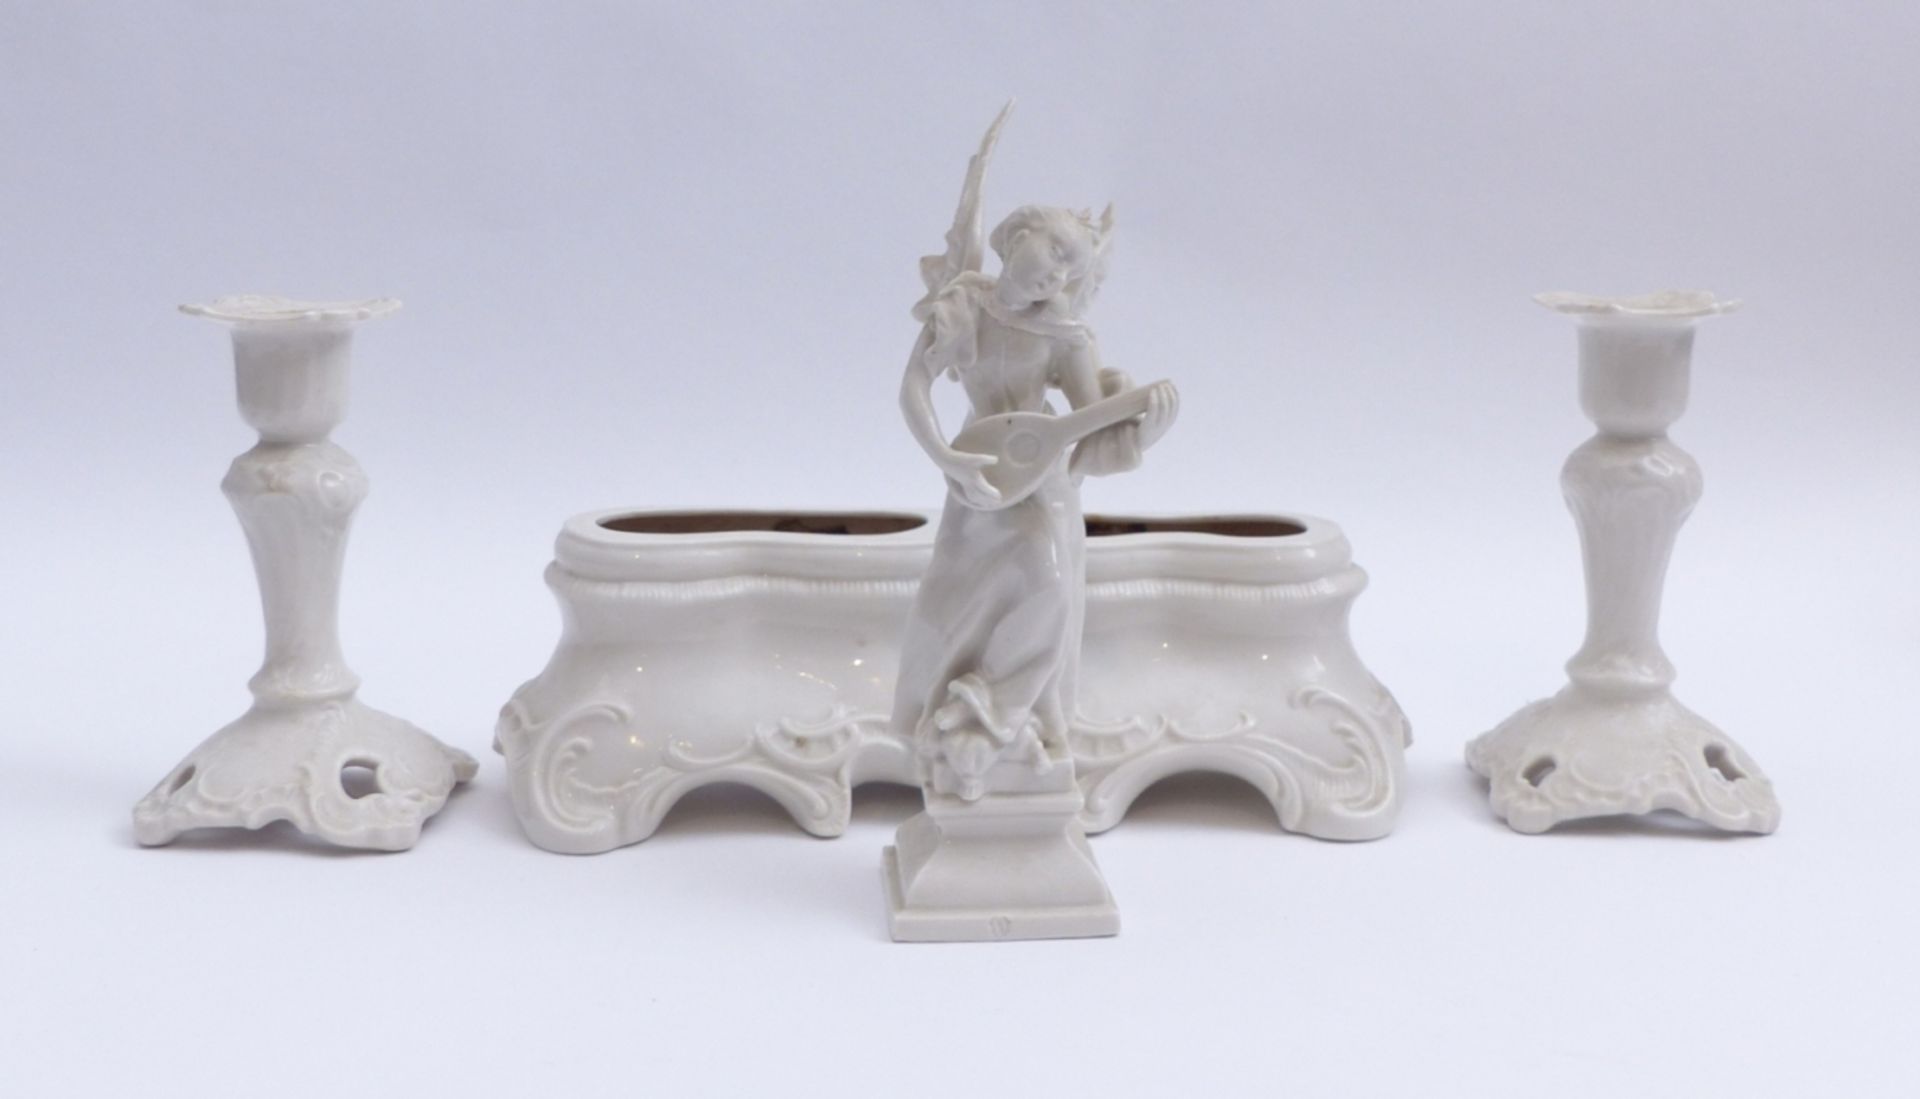 Table vase with two candlesticks and an angel figurine